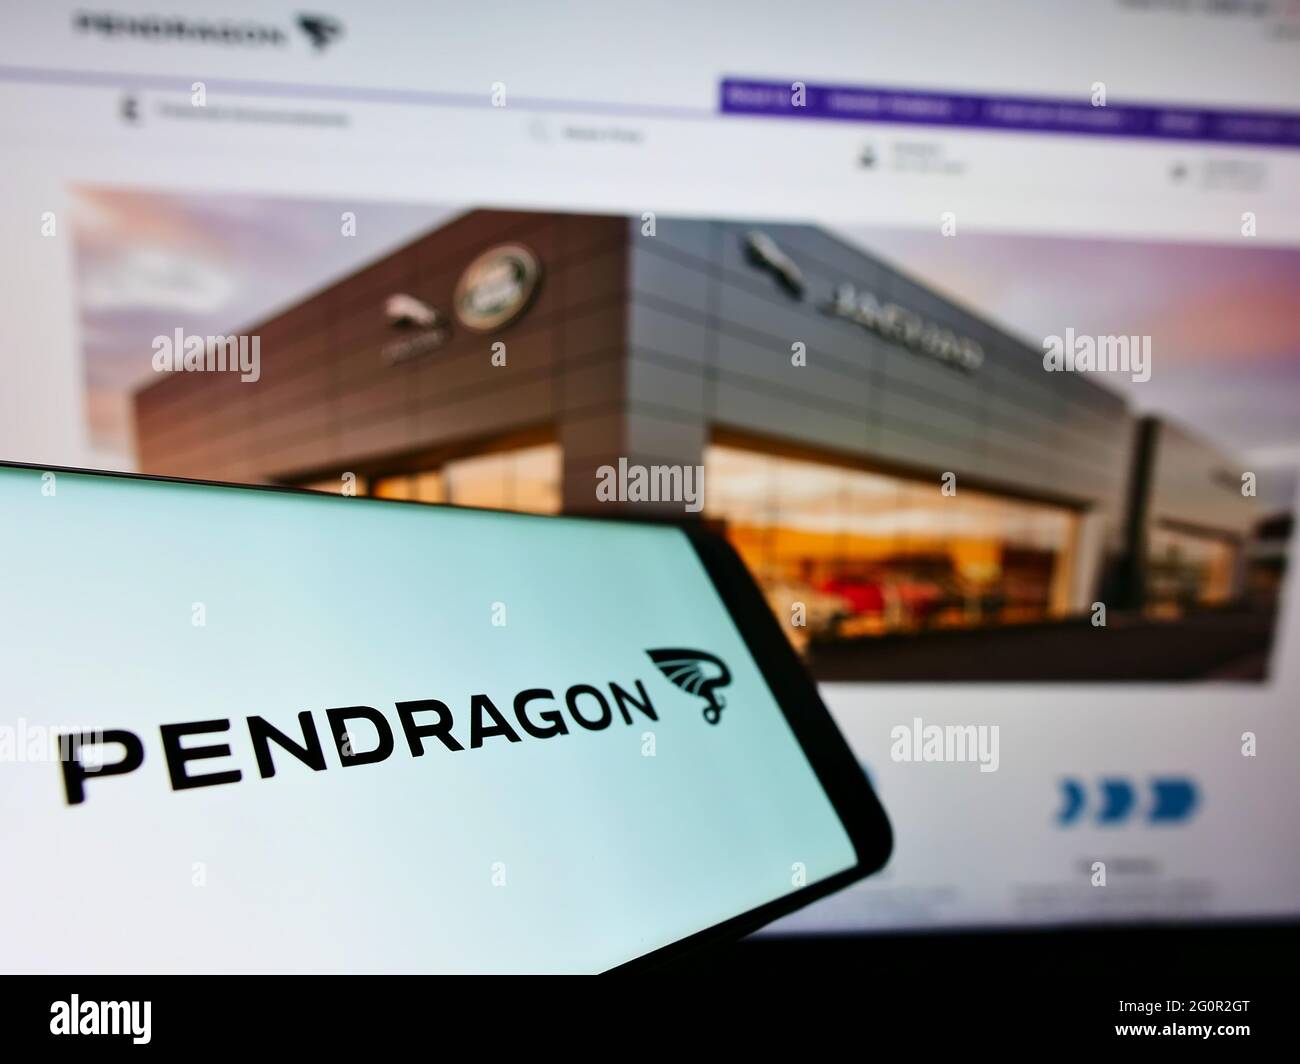 Smartphone with logo of British automotive retail company Pendragon PLC on screen in front of website. Focus on center-left of phone display. Stock Photo